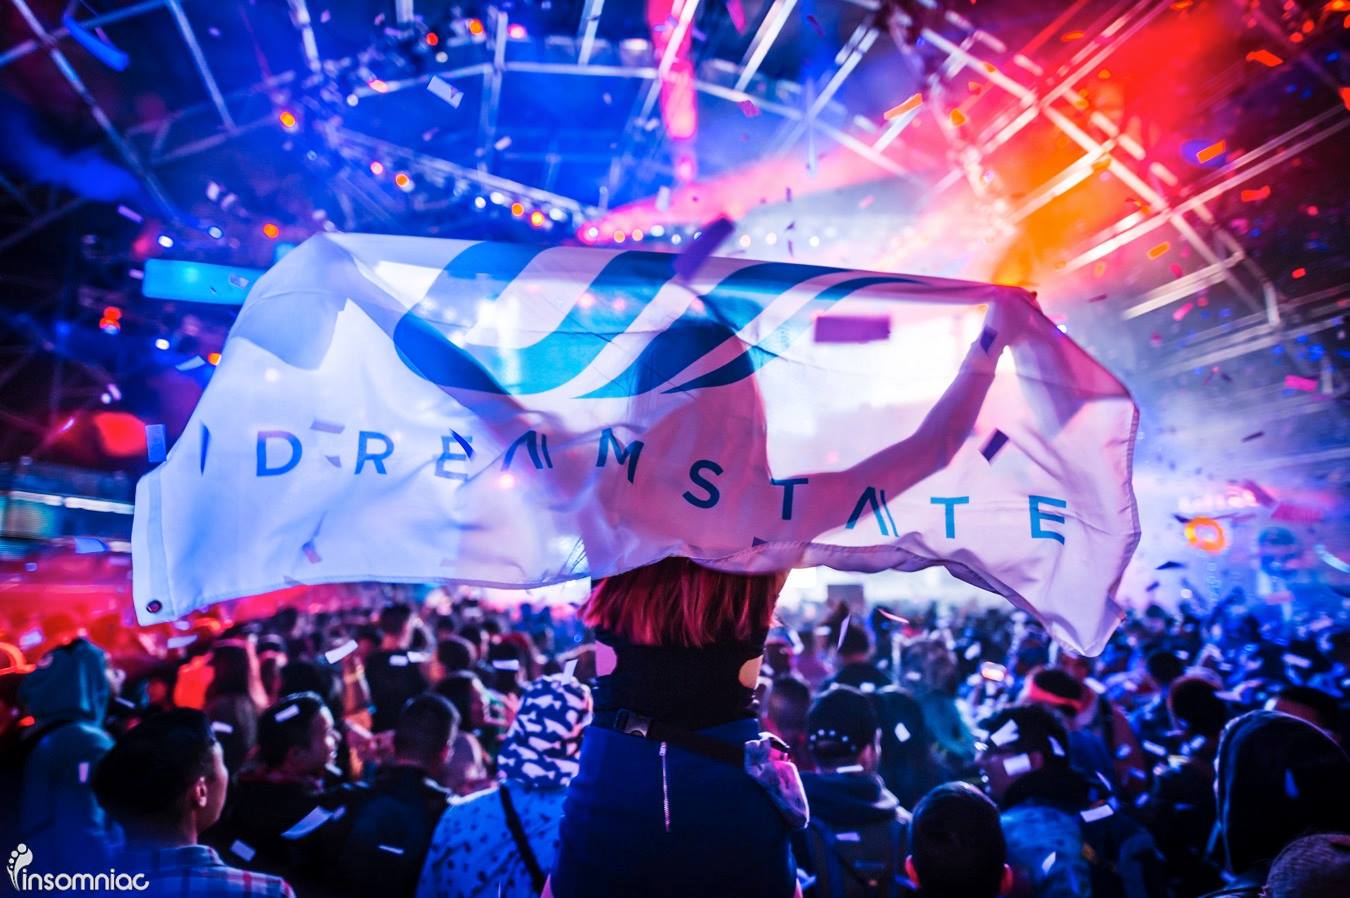 Insomniac's Dreamstate, returns to Southern California in 2021 Rave